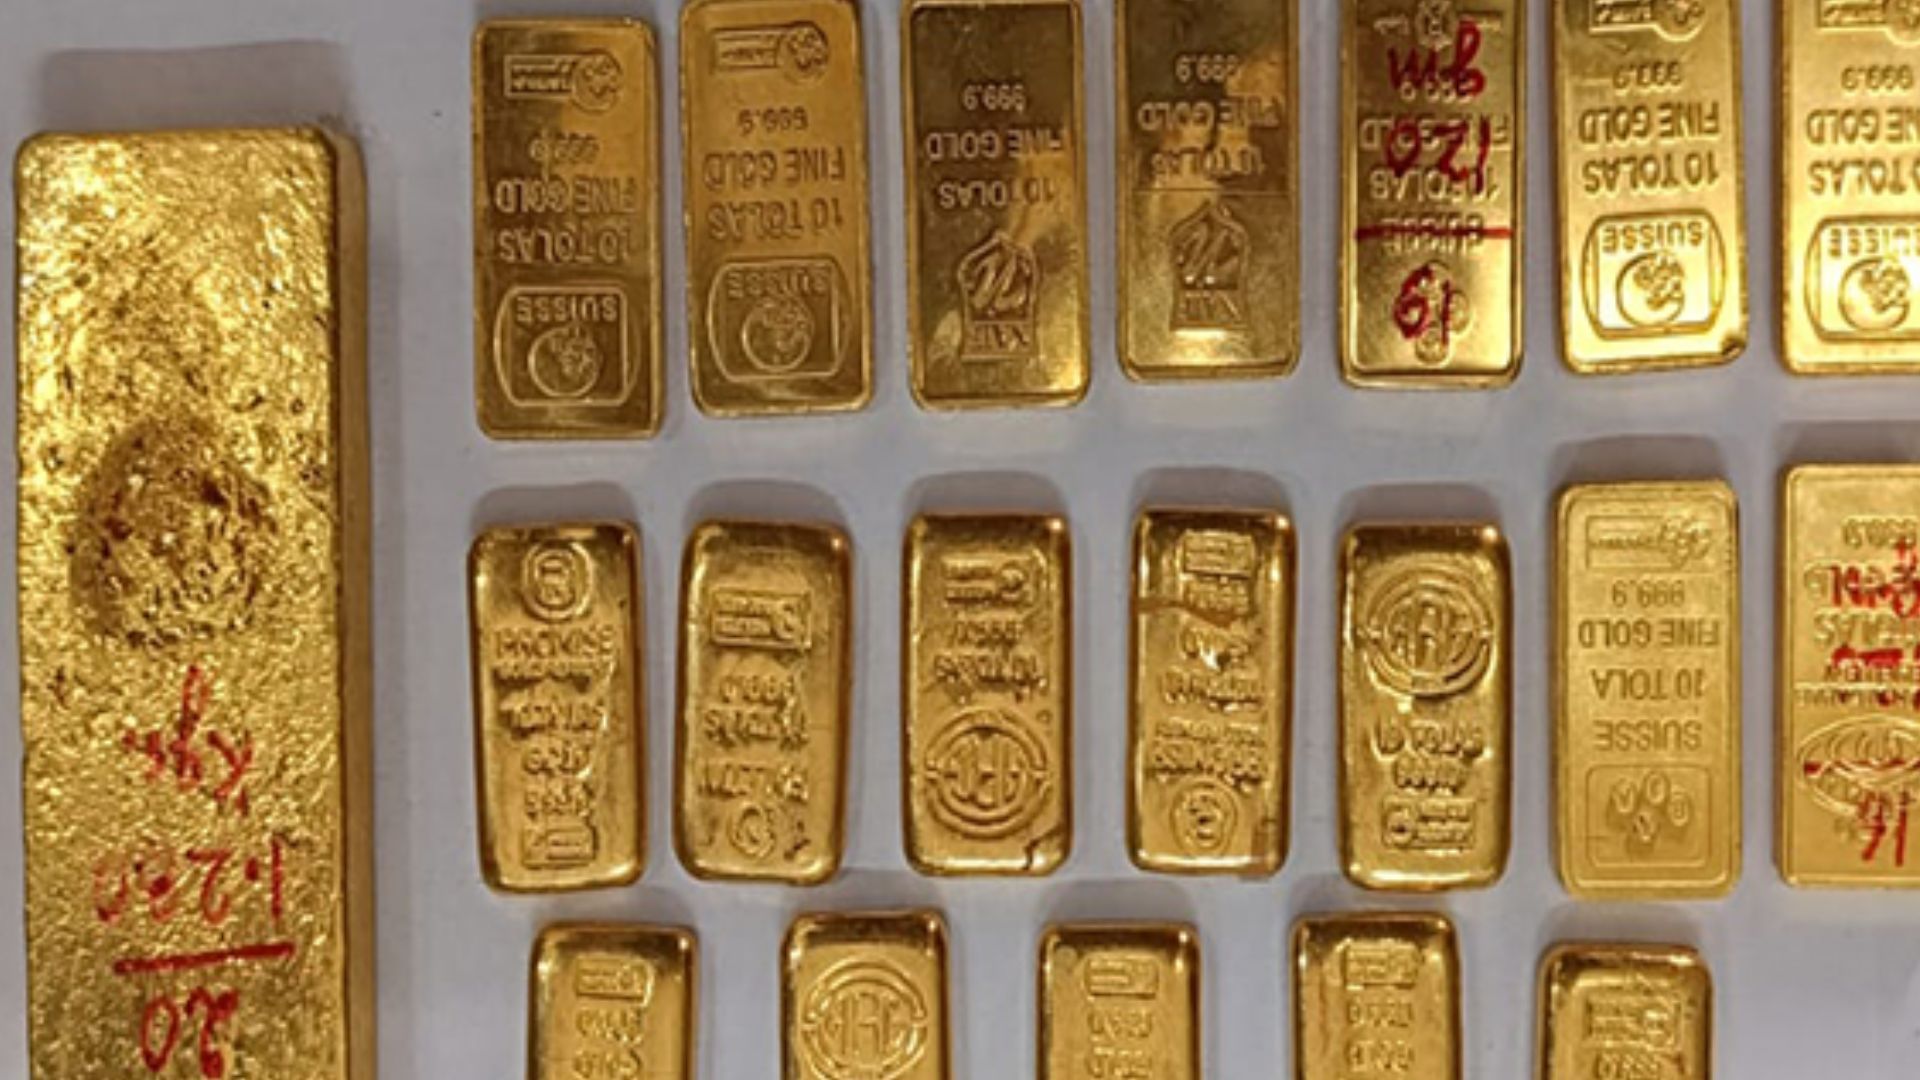 BSF troops seize 8.39 kg gold worth Rs 5.29 crore within two days